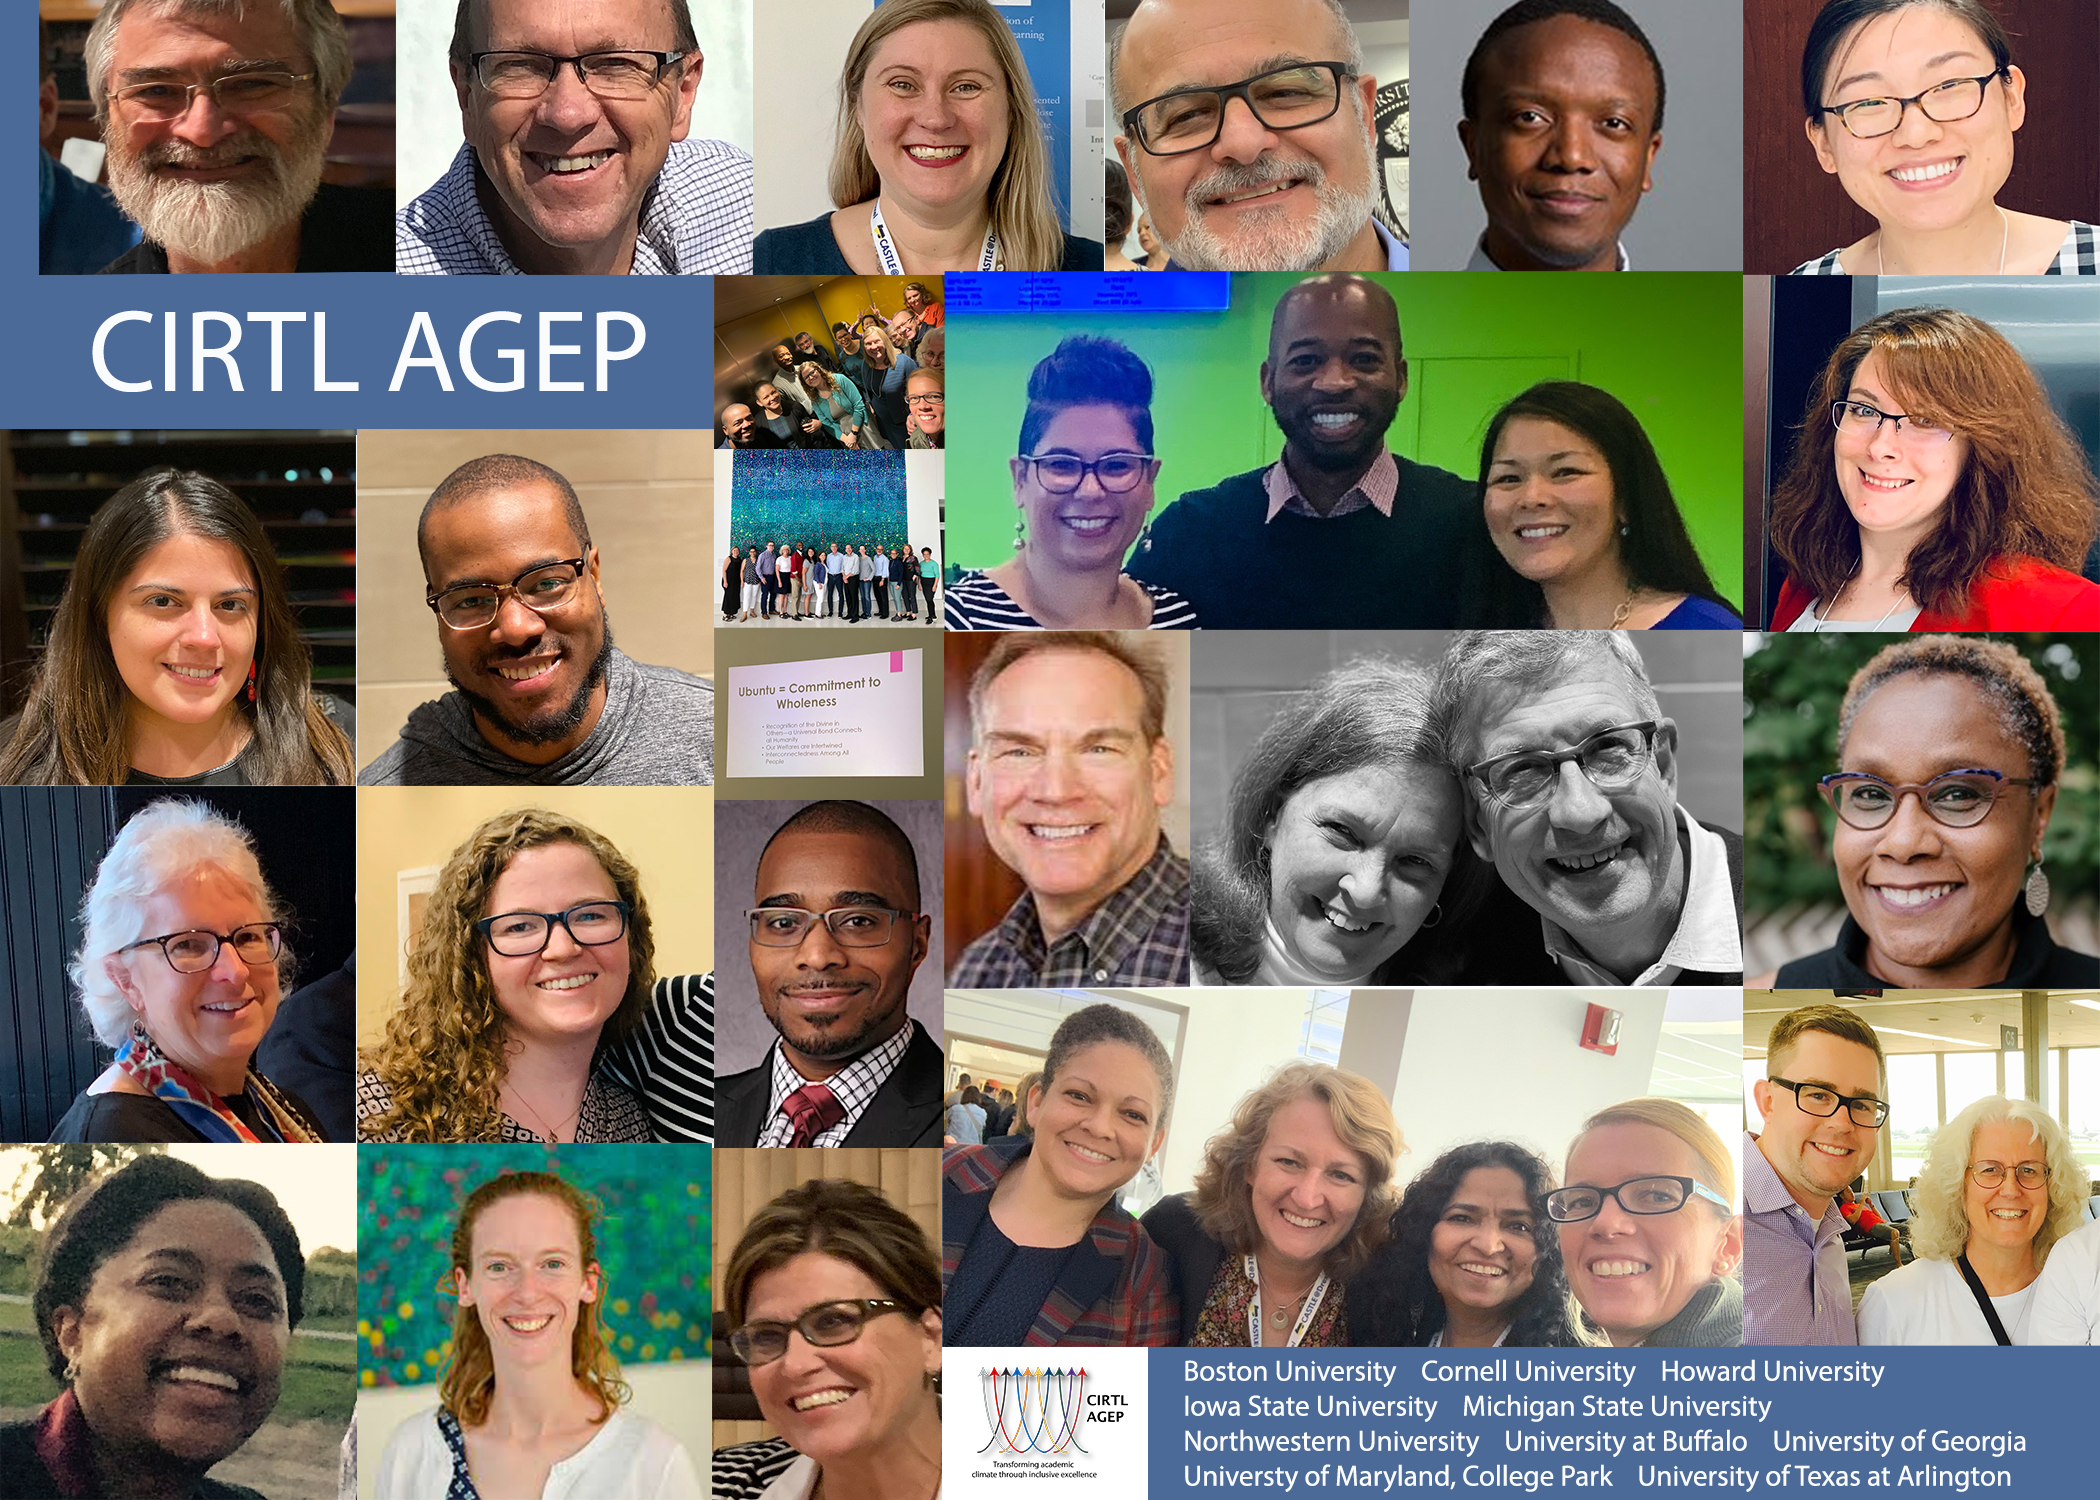 Collage of photos of CIRTL AGEP collaborators